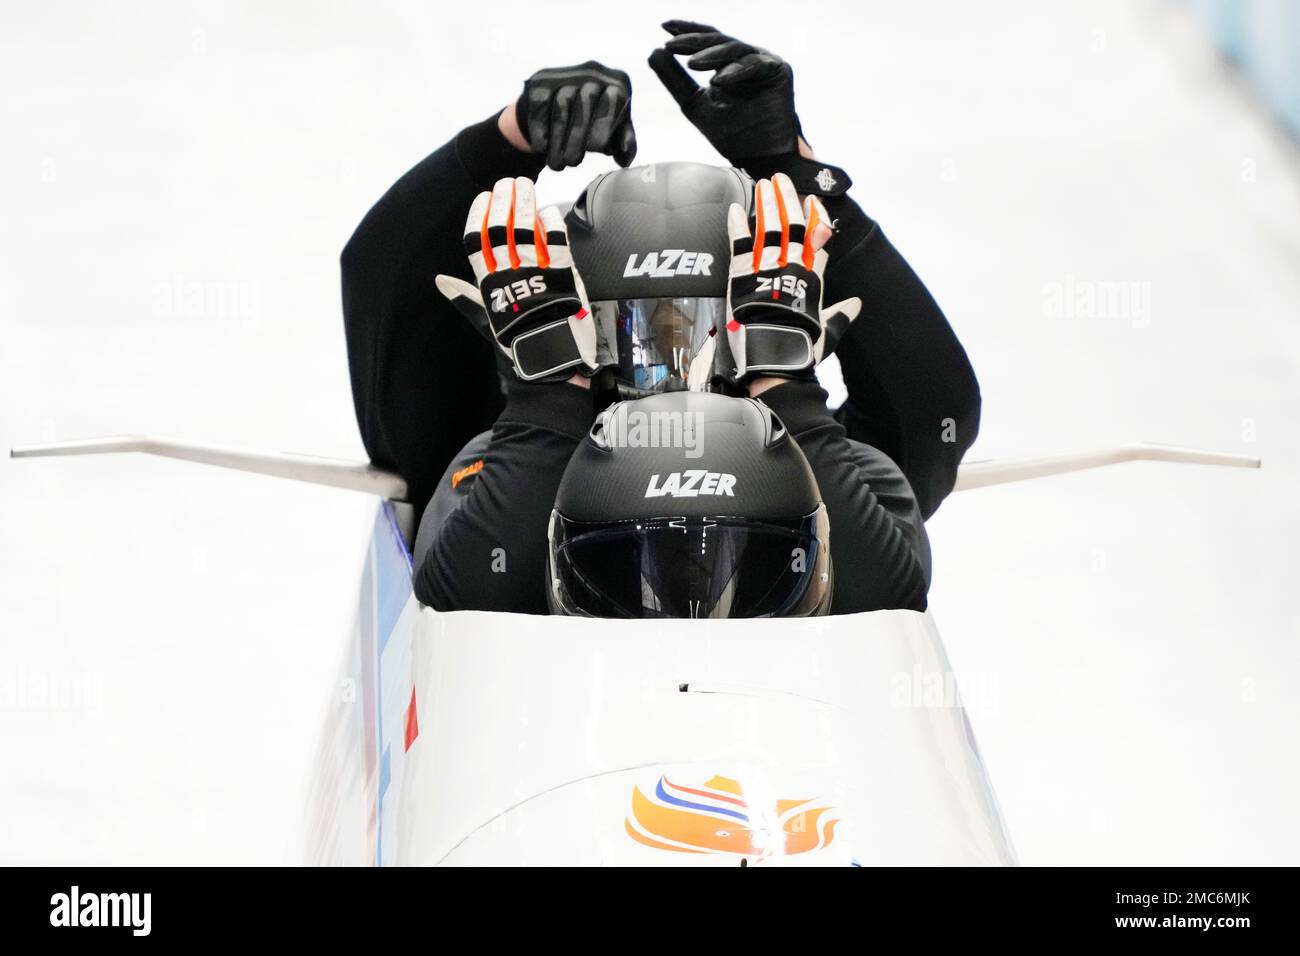 Ivo de Bruin of Netherlands and his team start during a 4-man bobsleigh training heat